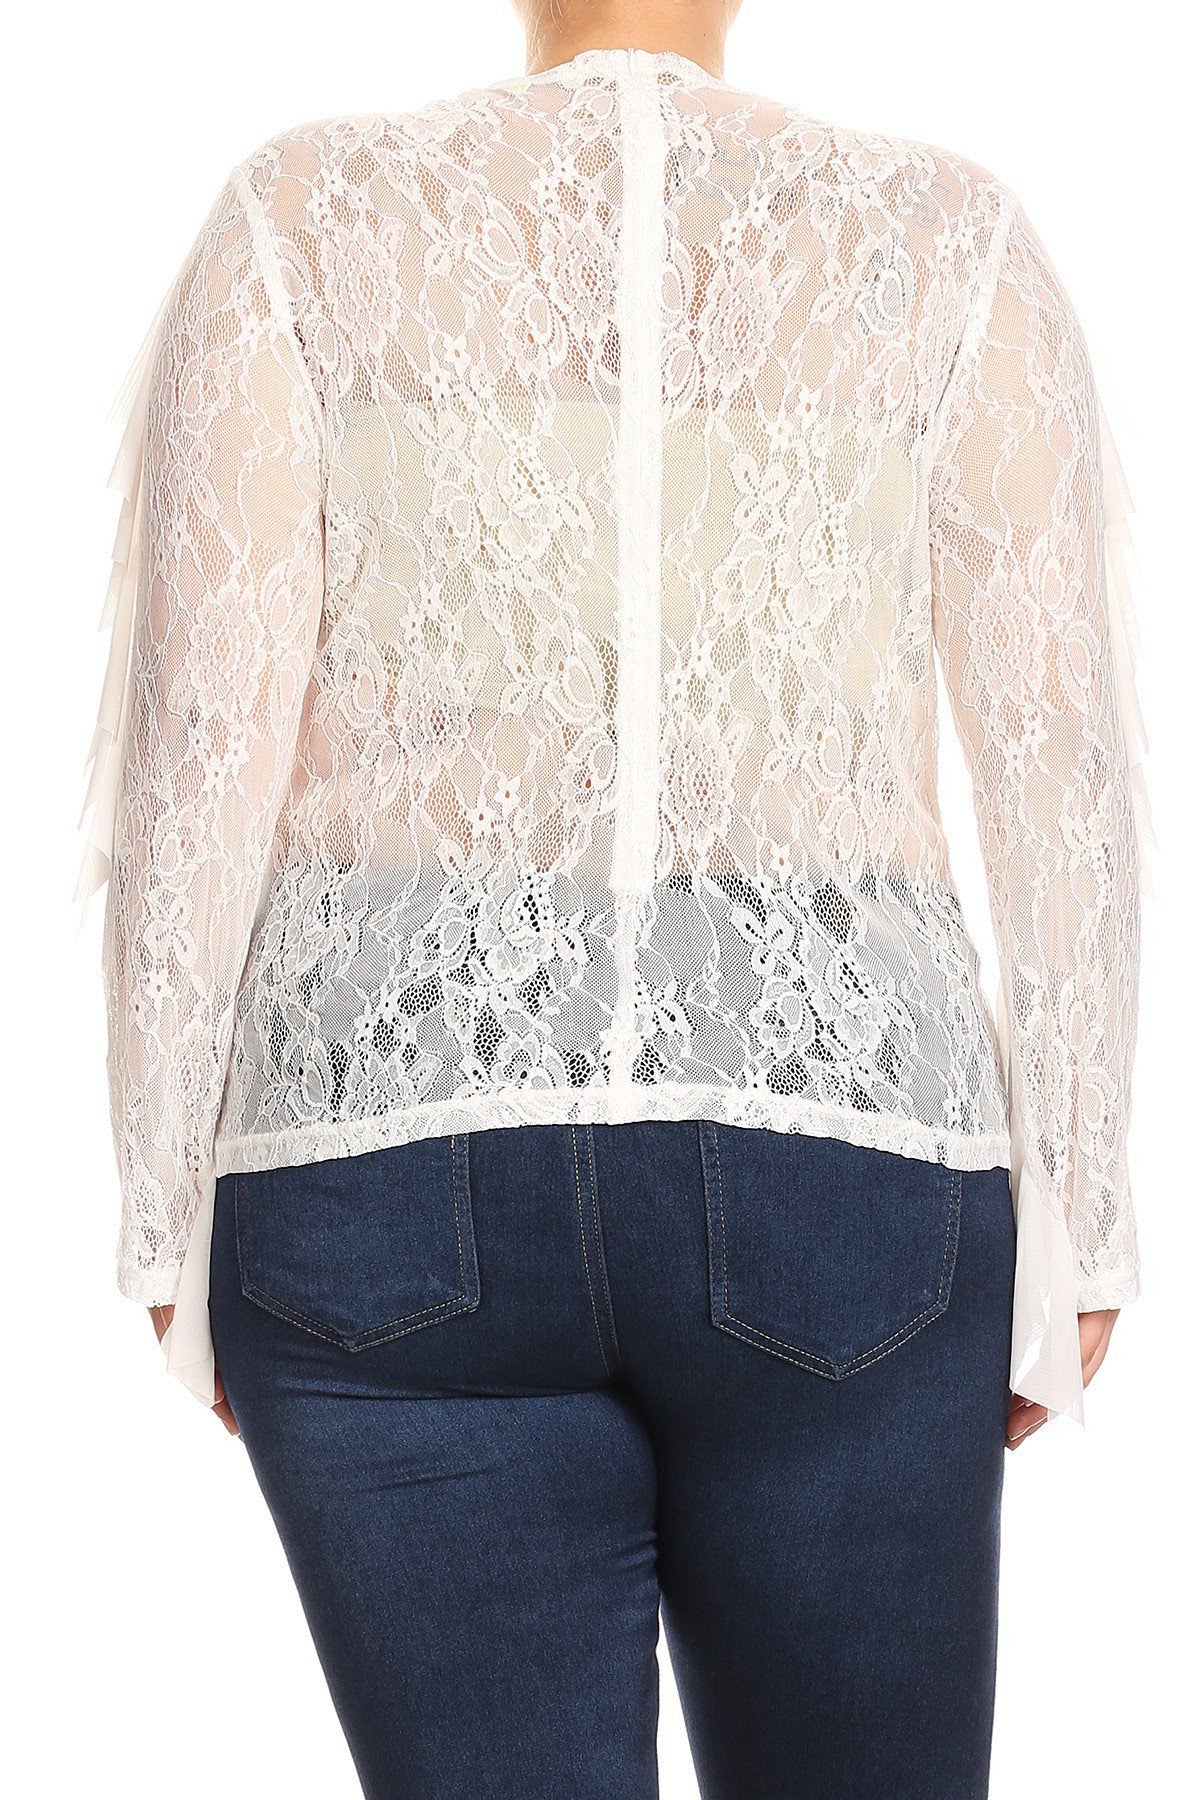 Ivory Lace Ruffle Trim Top